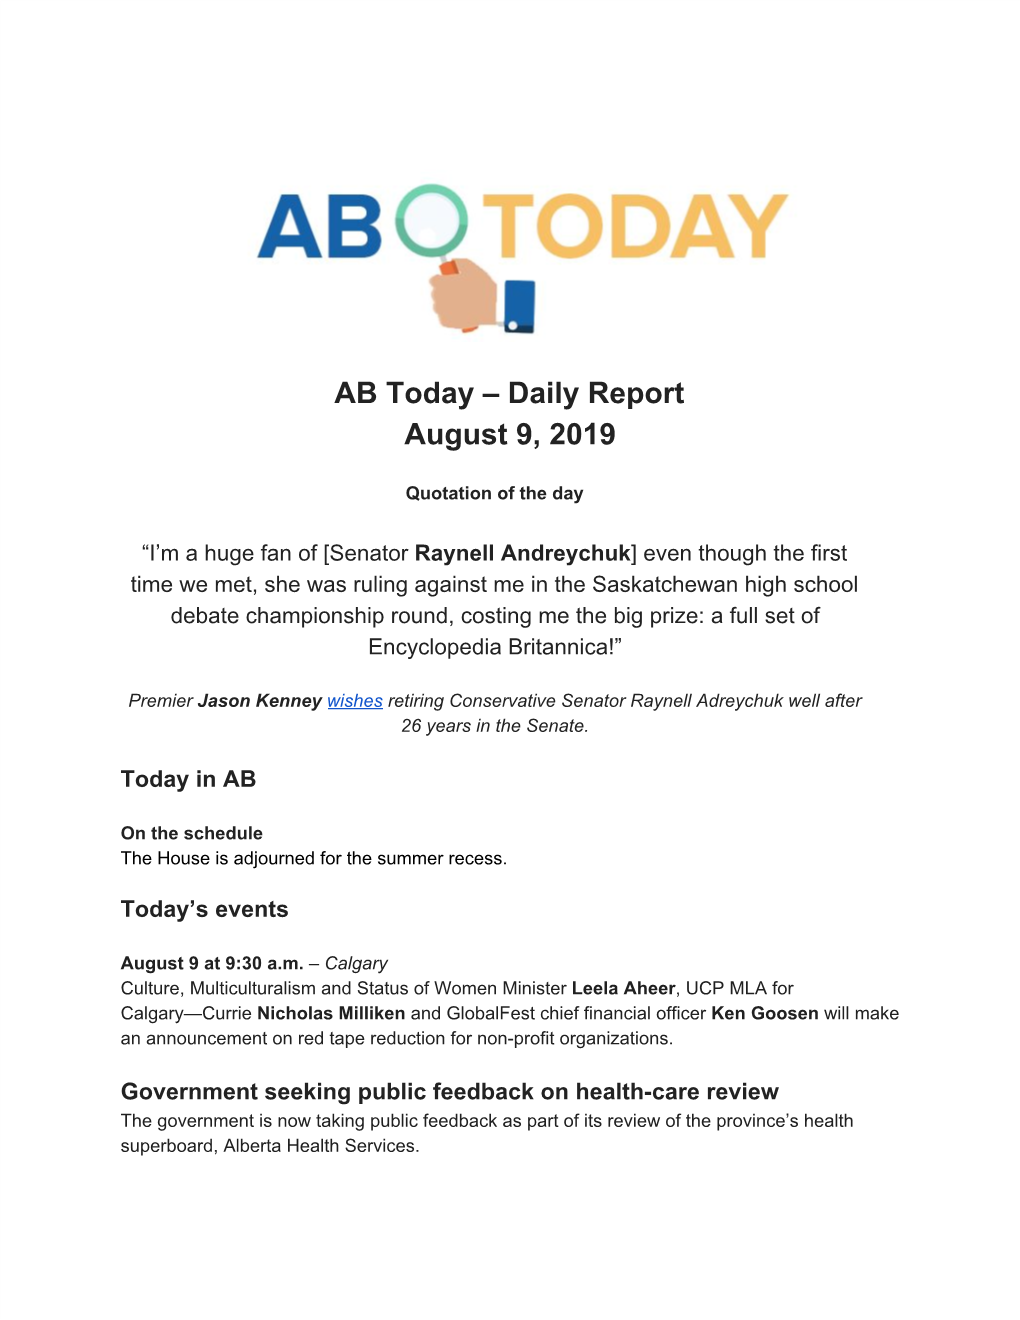 AB Today – Daily Report August 9, 2019